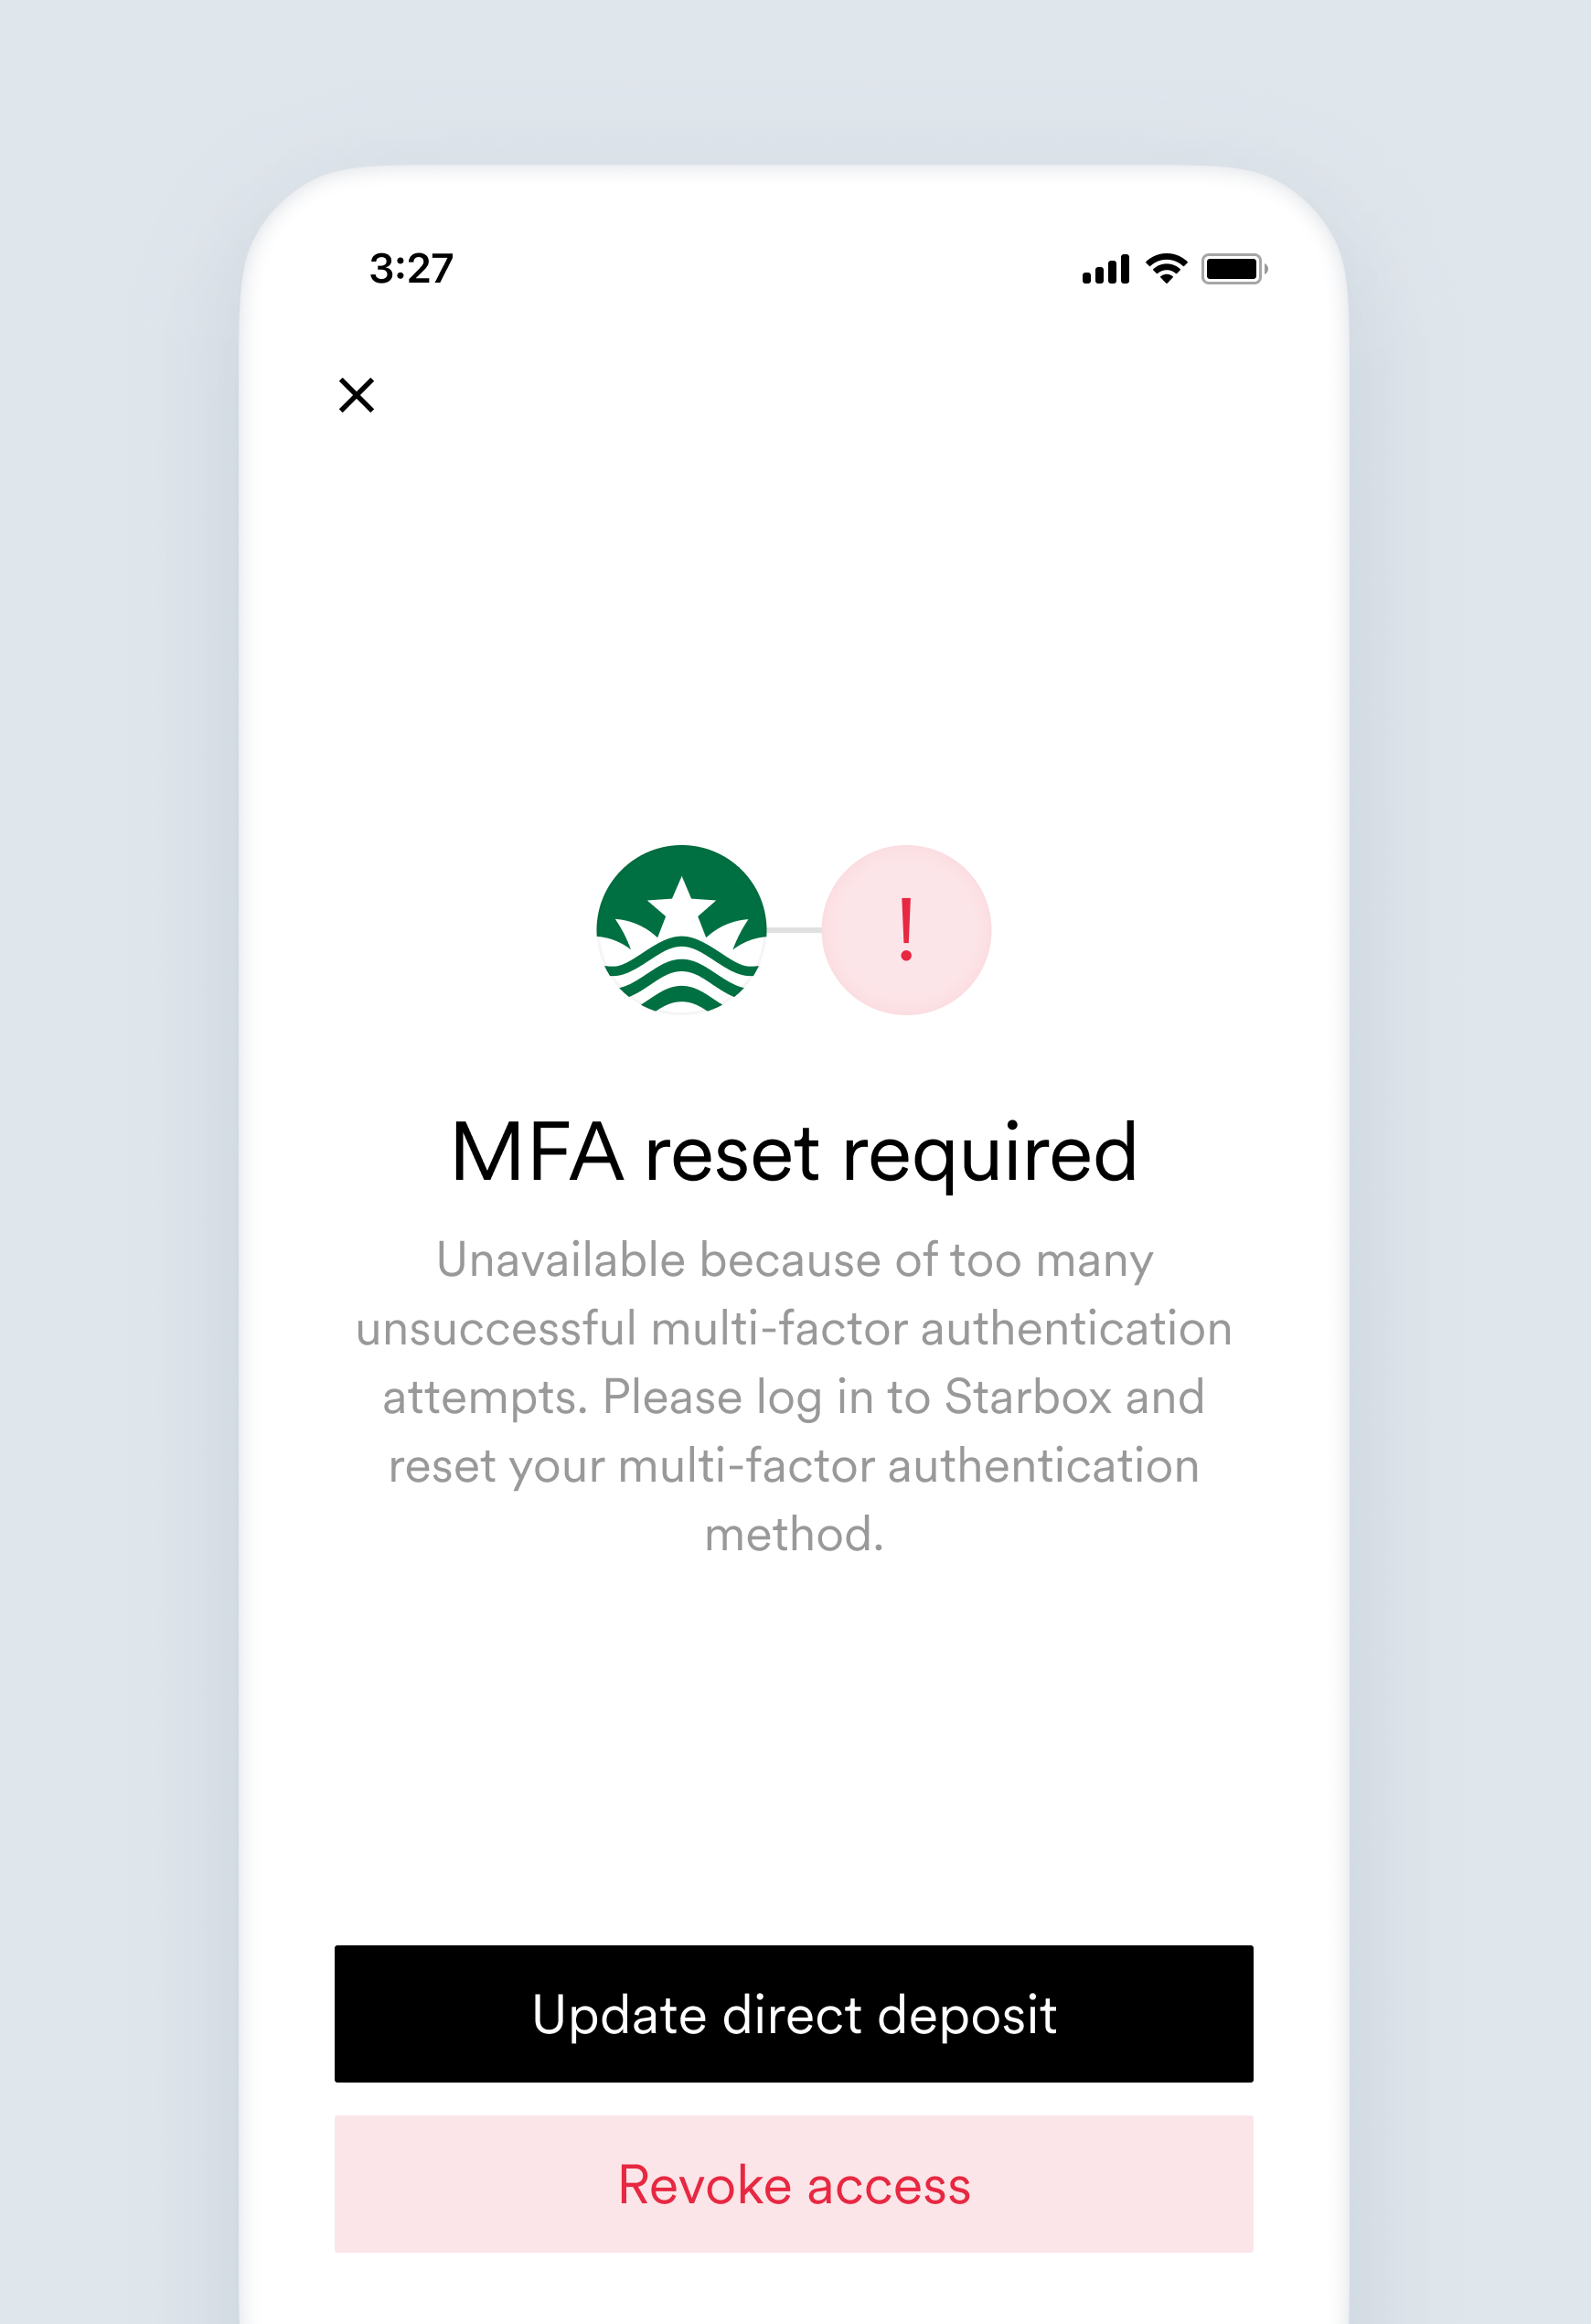 The mfa_attempts_exceeded direct deposit switching error screen.